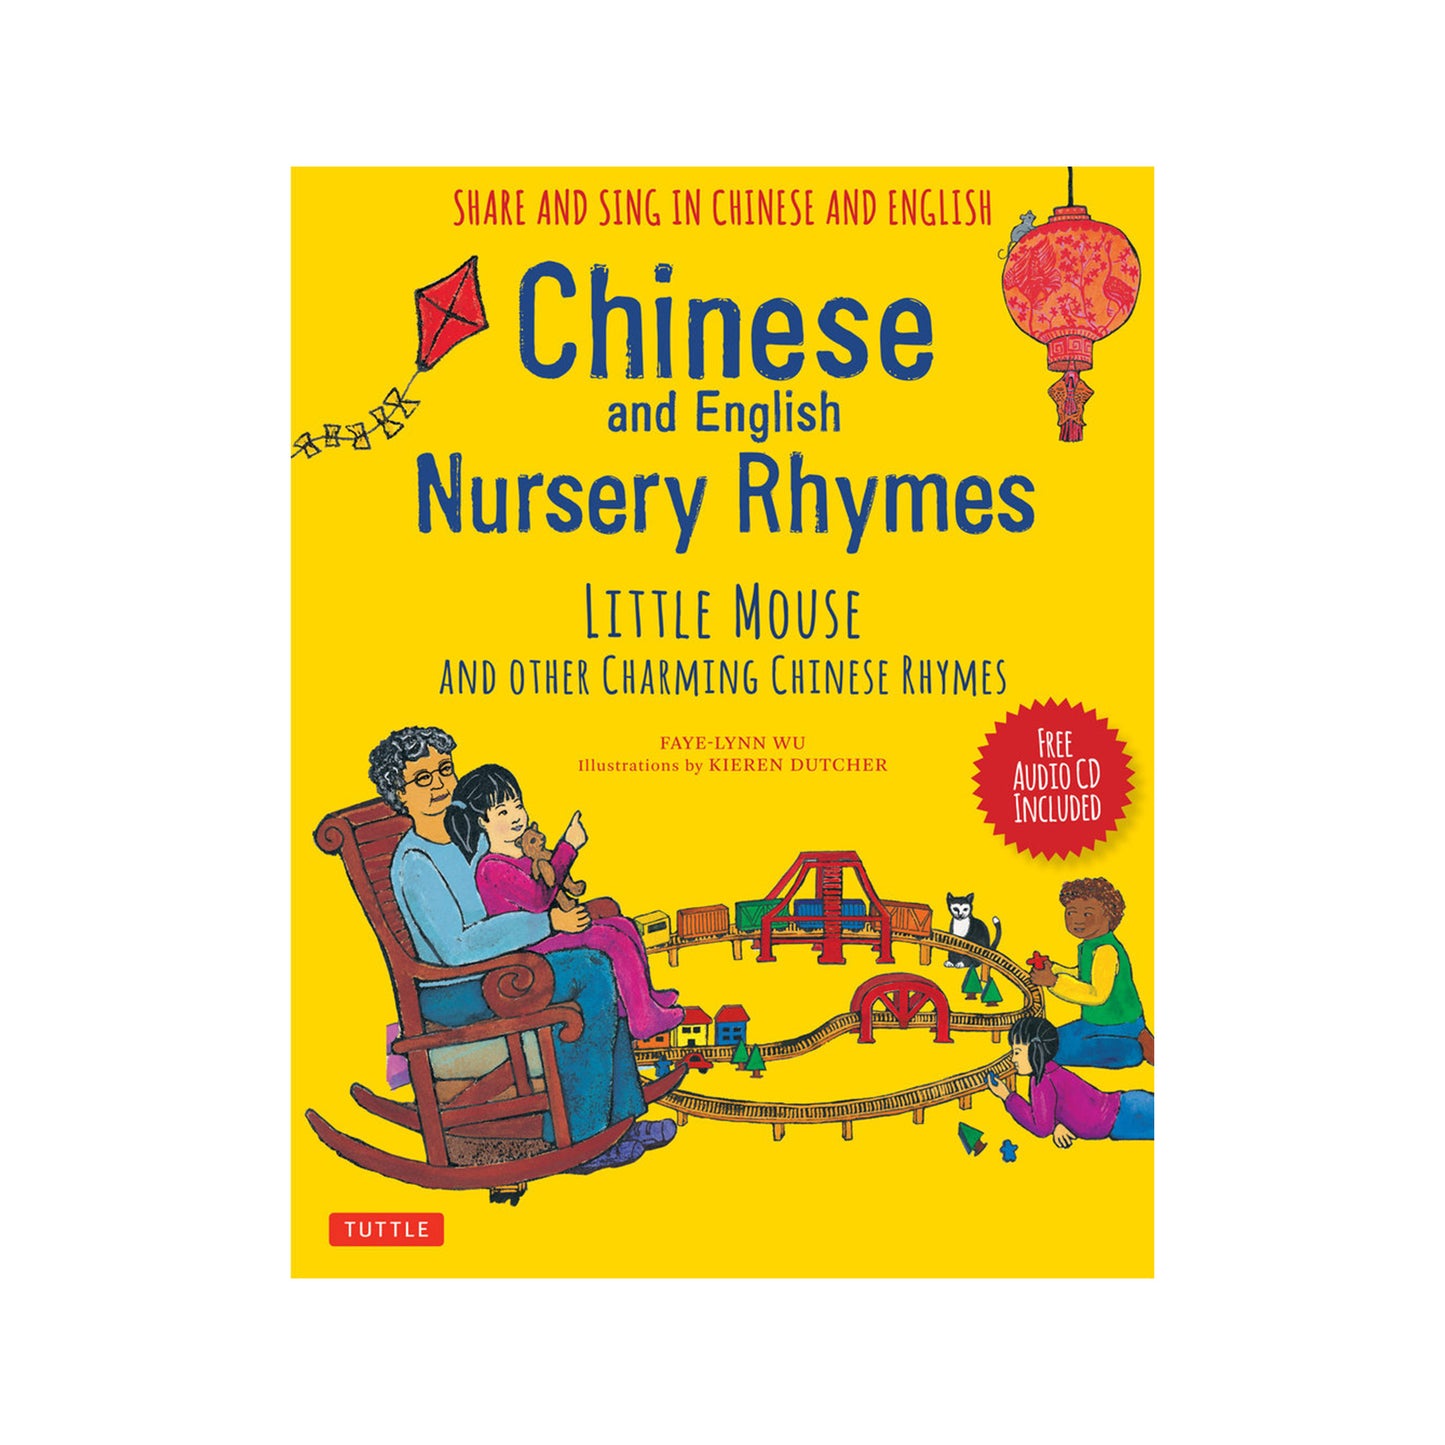 Chinese and English Nursery Rhymes: Little Mouse and Other Charming Chinese Rhymes (Audio Disc in Chinese & English Included)